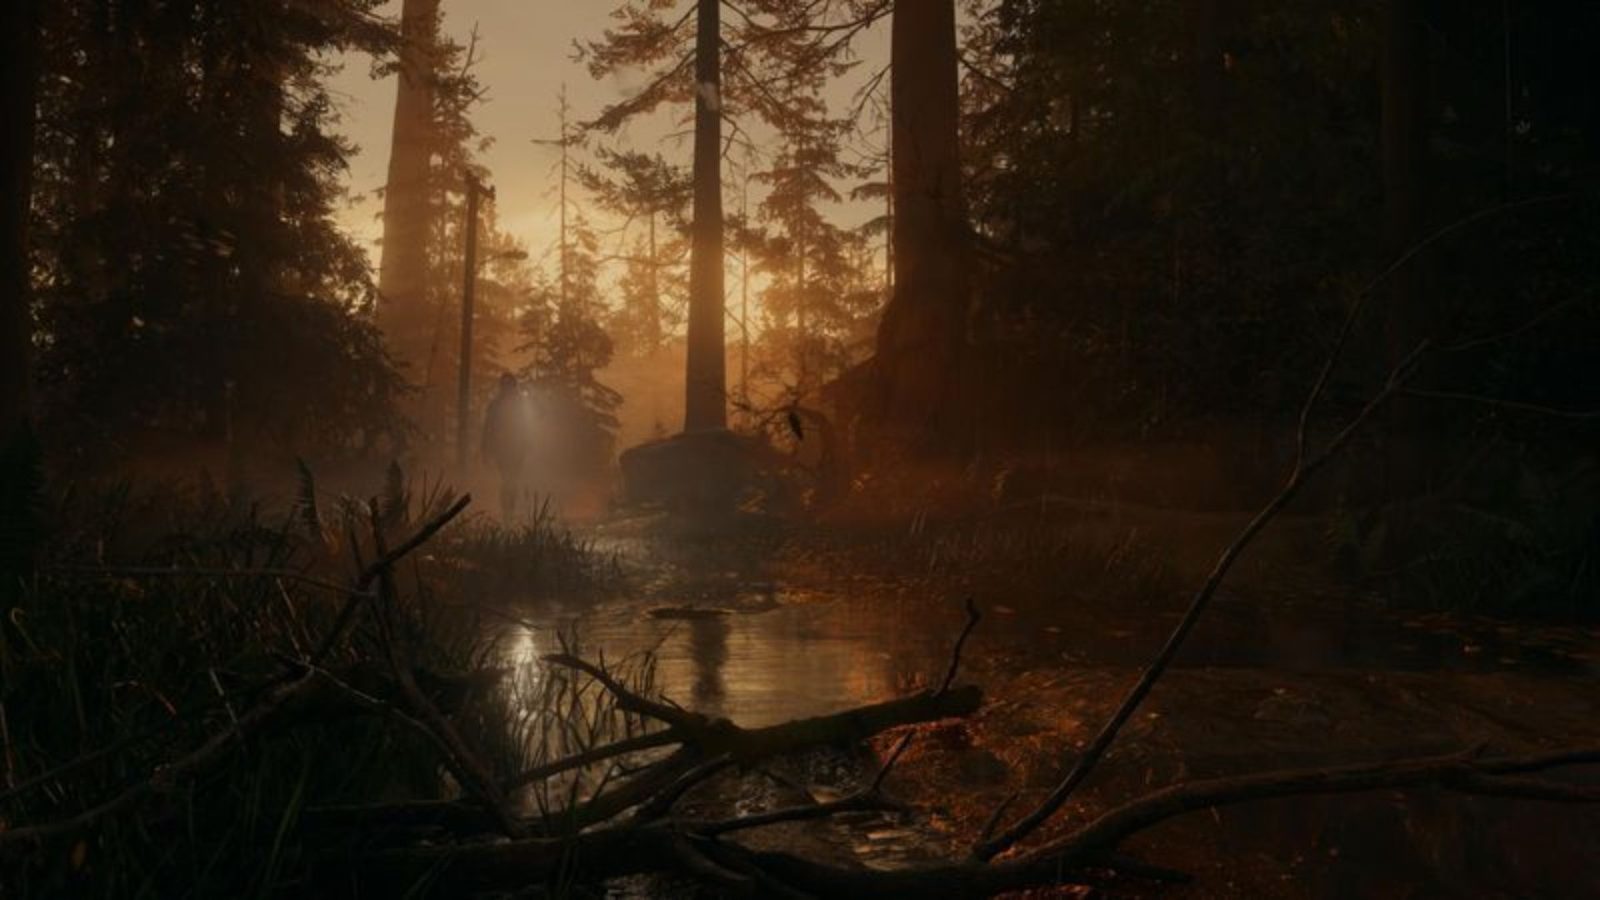 Alan Wake 2 system requirements - can you run the game?